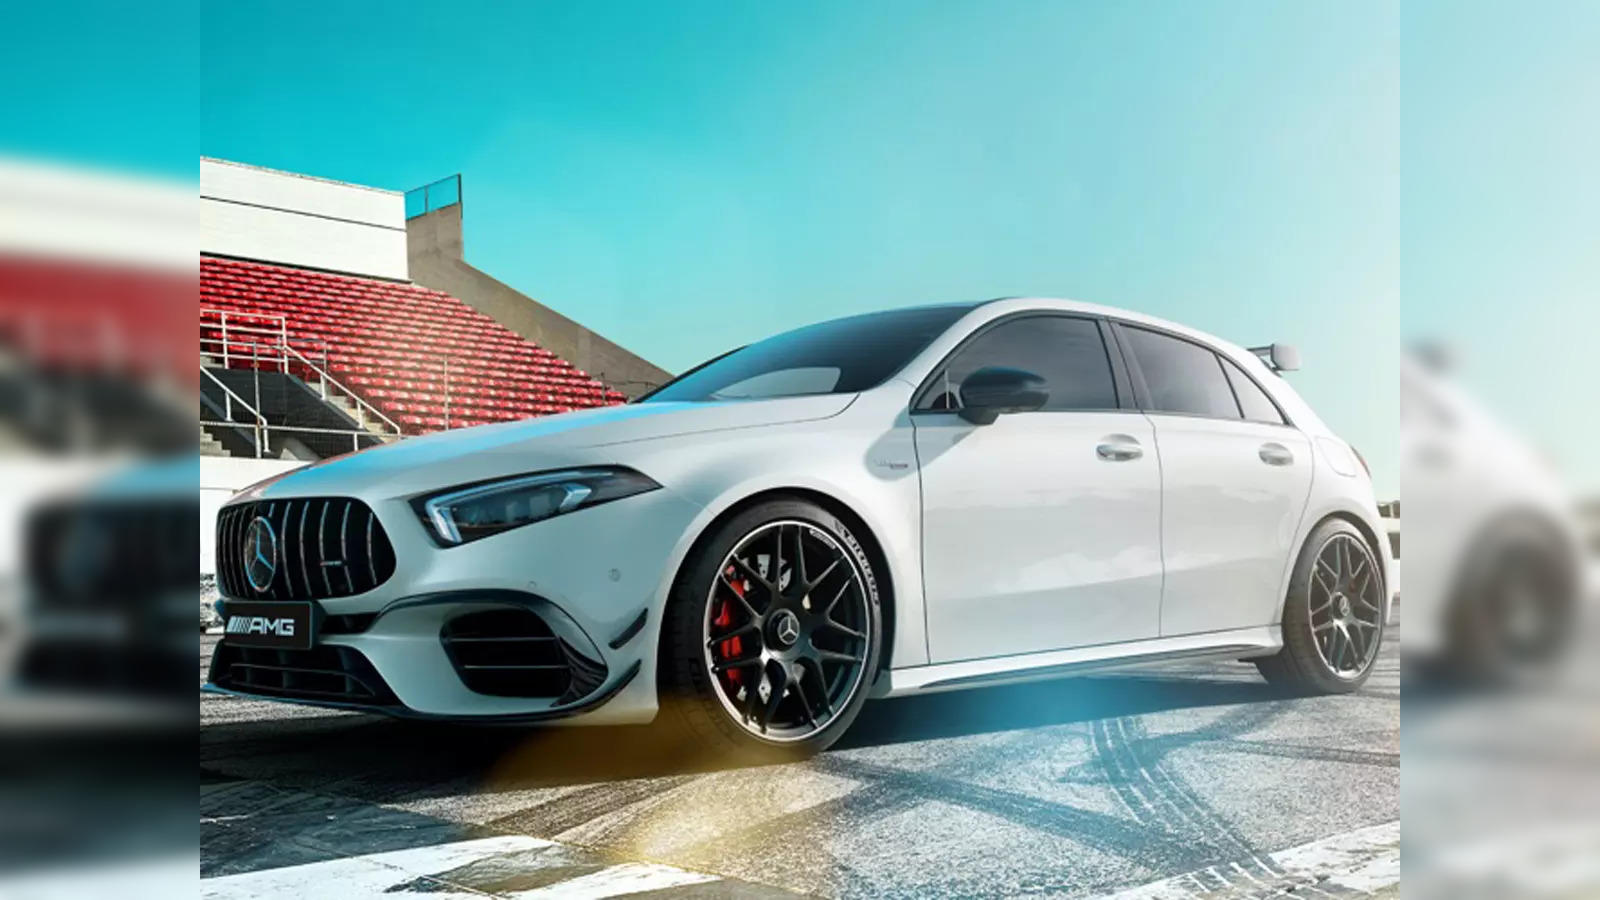 2023 Mercedes-AMG A 45 S 4Matic+ - Free high resolution car images